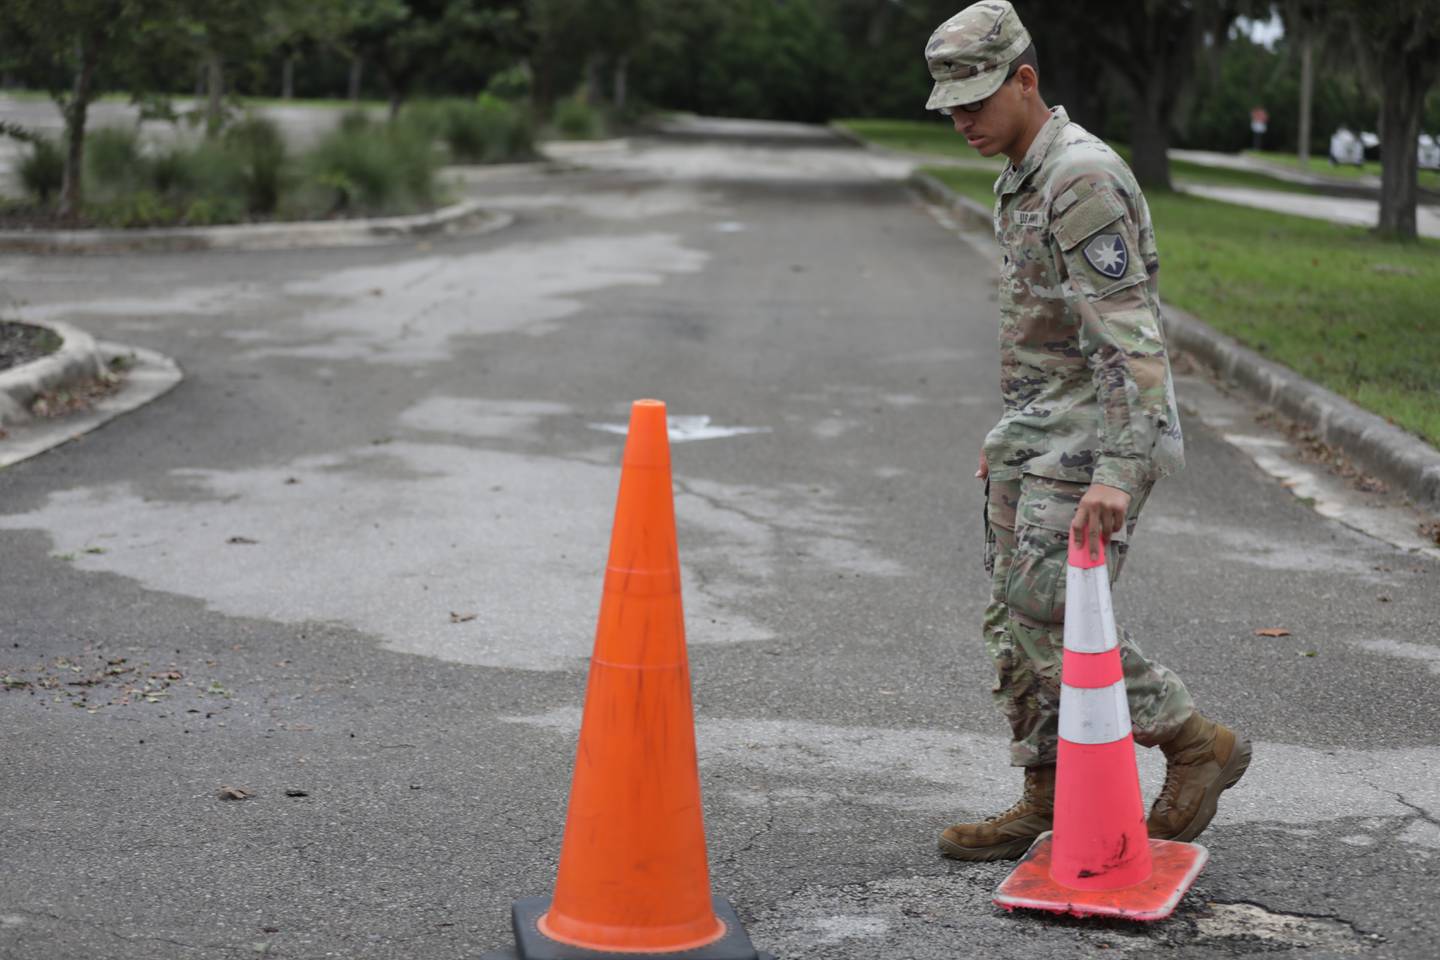 Spc. Anthony Correa, a soldier with the Florida National Guard's 50th Regional Support Group, sets up cones in preparation for the arrival of soldiers from other states' National Guards in Gainesville, Fla.